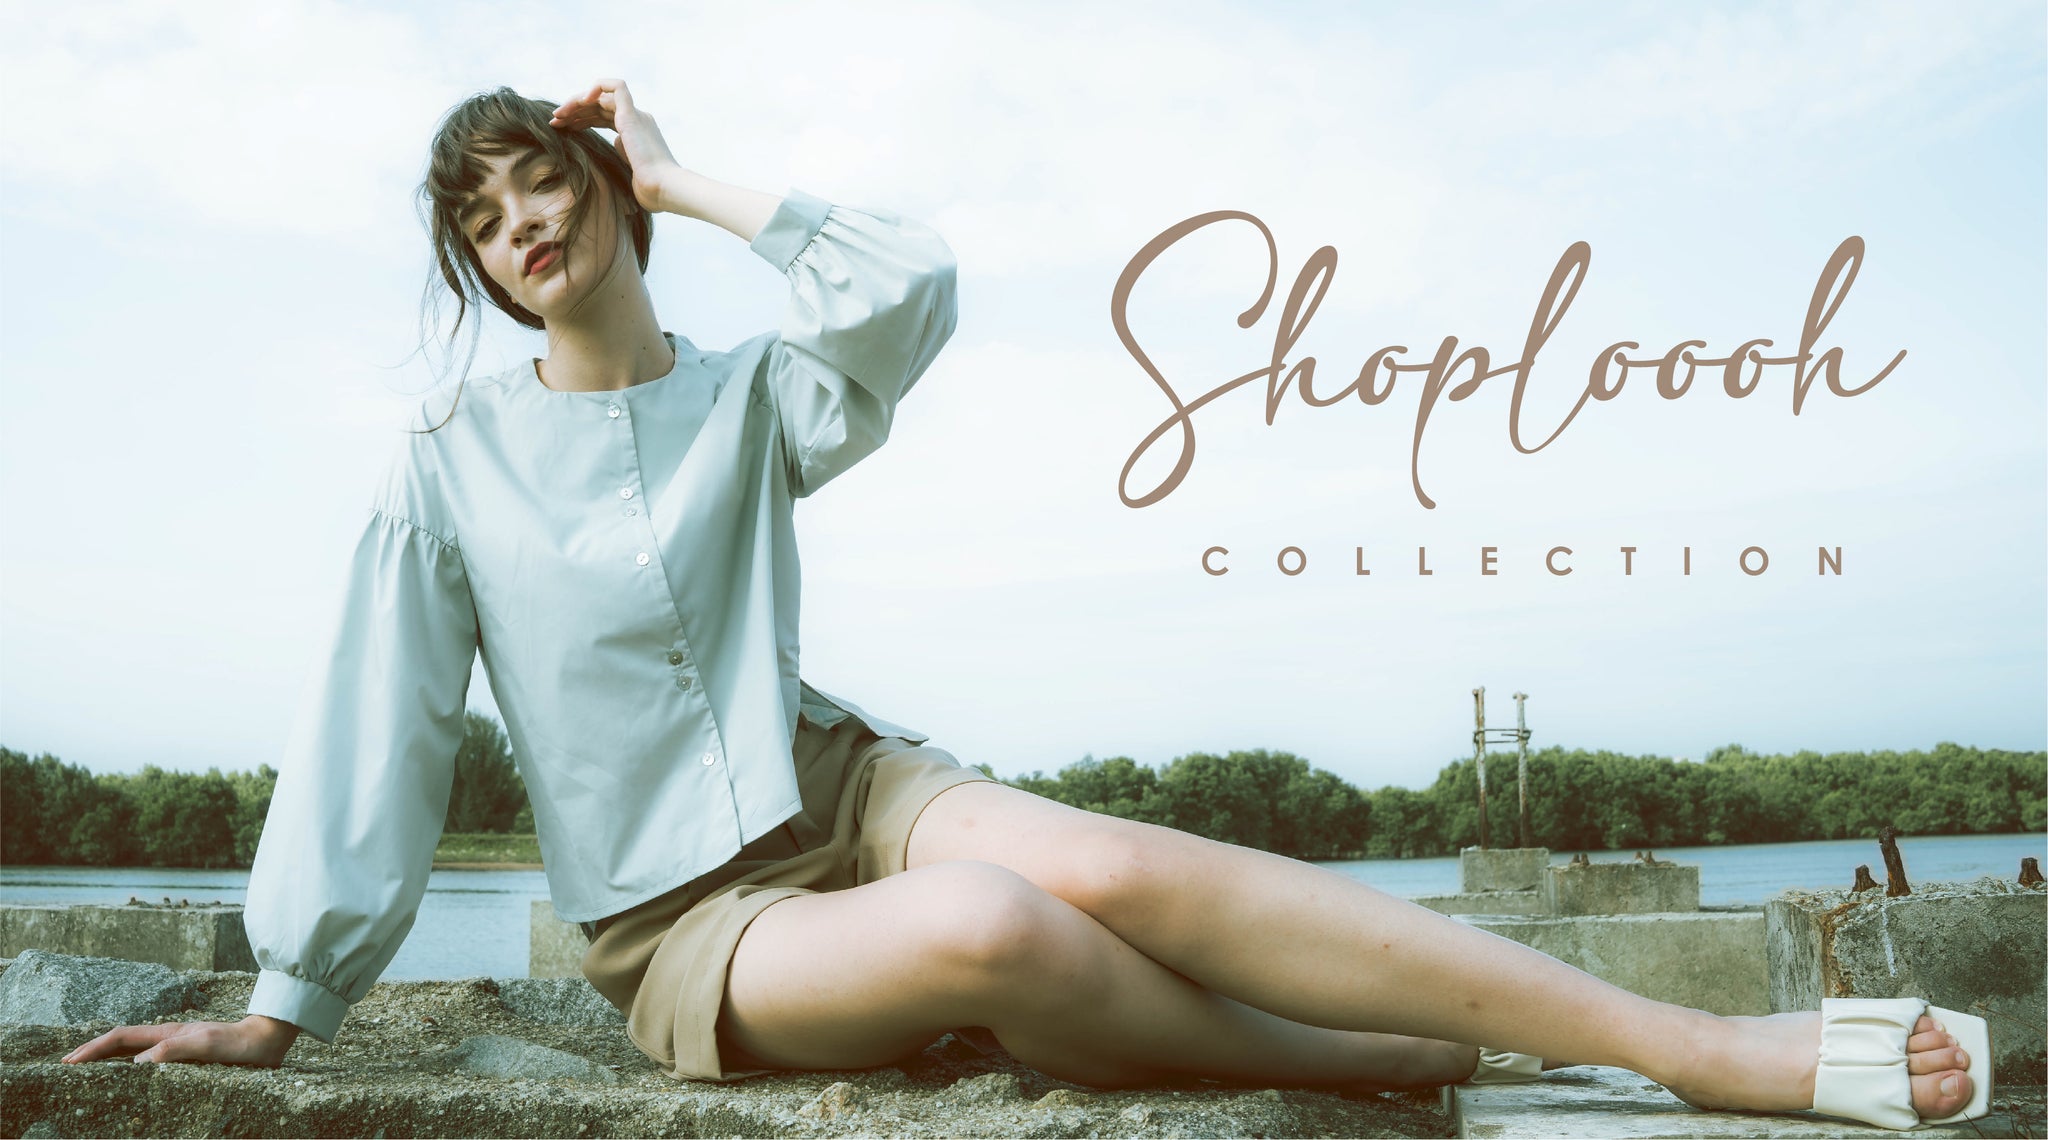 SHOPLOOOH Collection Vol.2